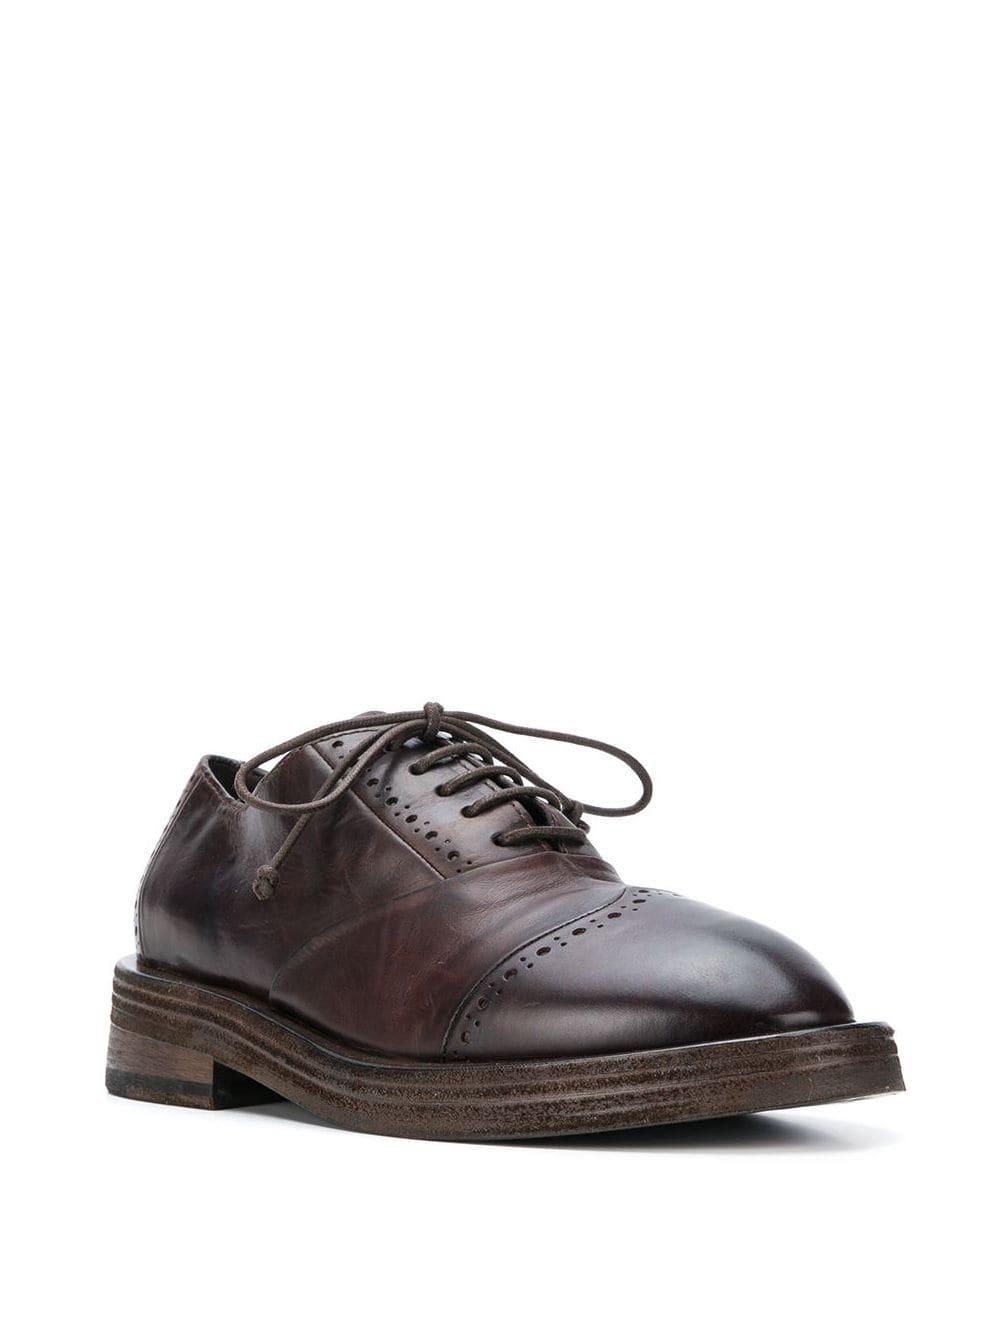 Marsèll Leather Classic Embroidered Brogues in Brown for Men - Lyst